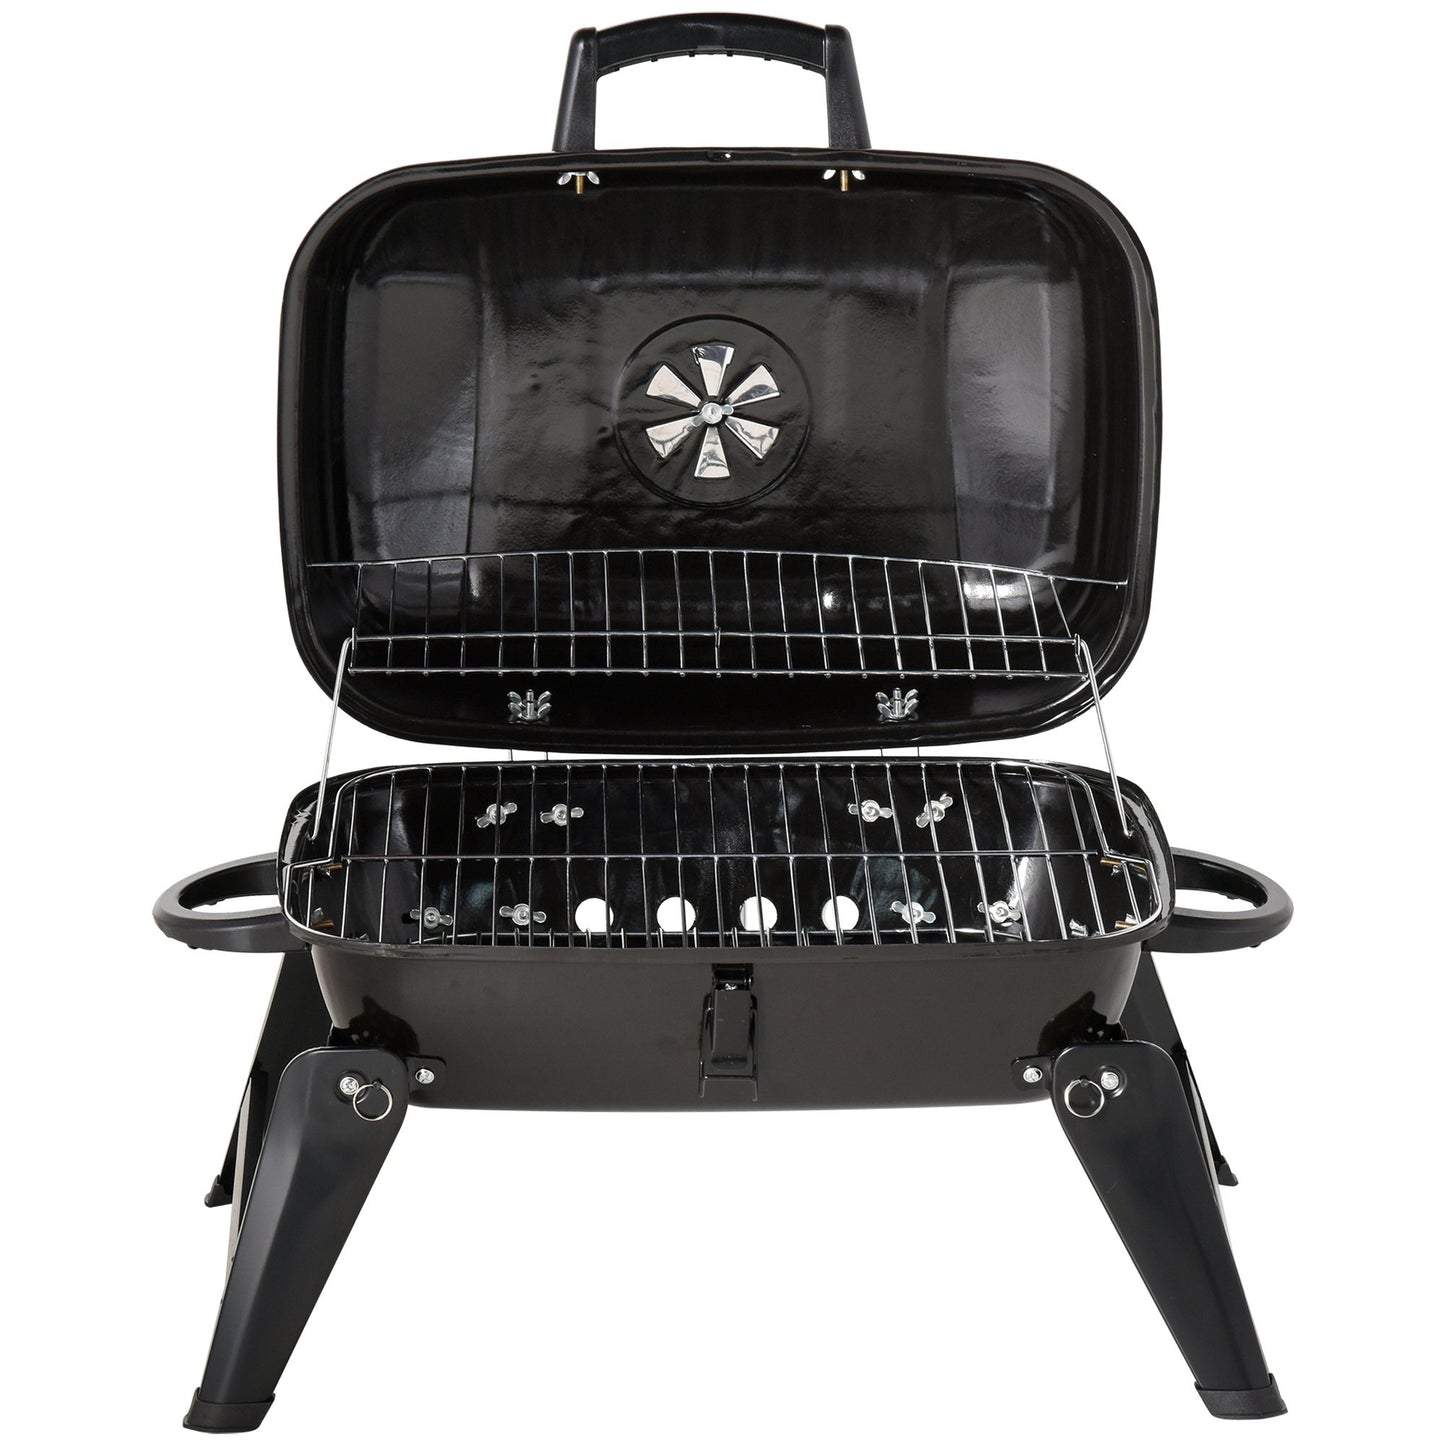 Outsunny Charcoal Grill, Iron Porcelain Enameled Lid, 59Lx43Wx36H cm-Black